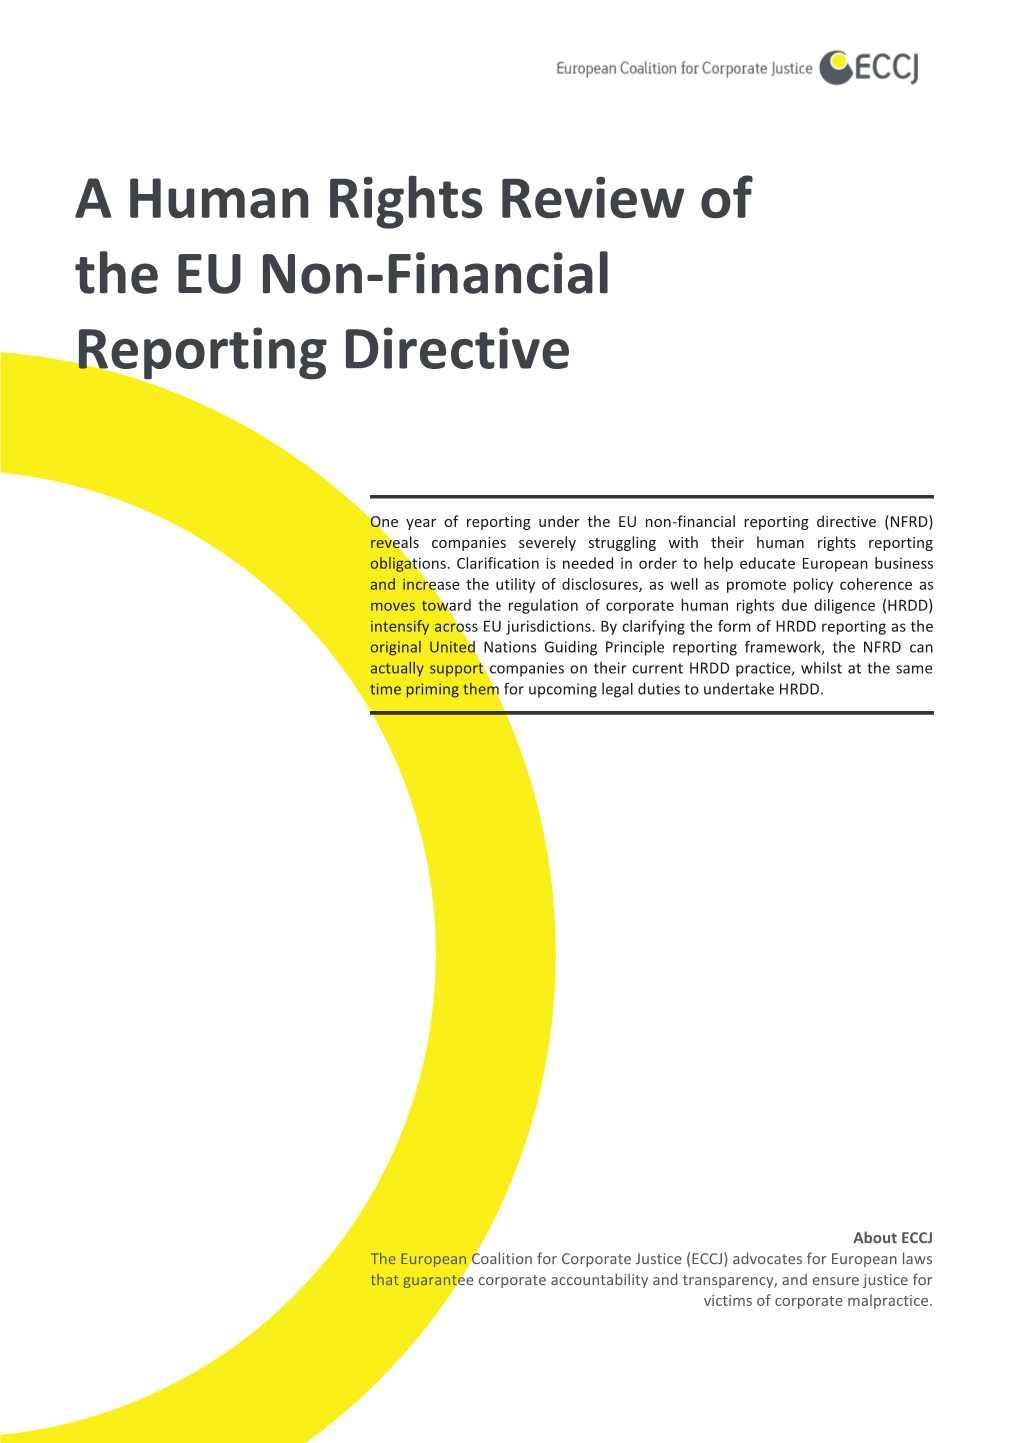 A Human Rights Review of the EU Non-Financial Reporting Directive